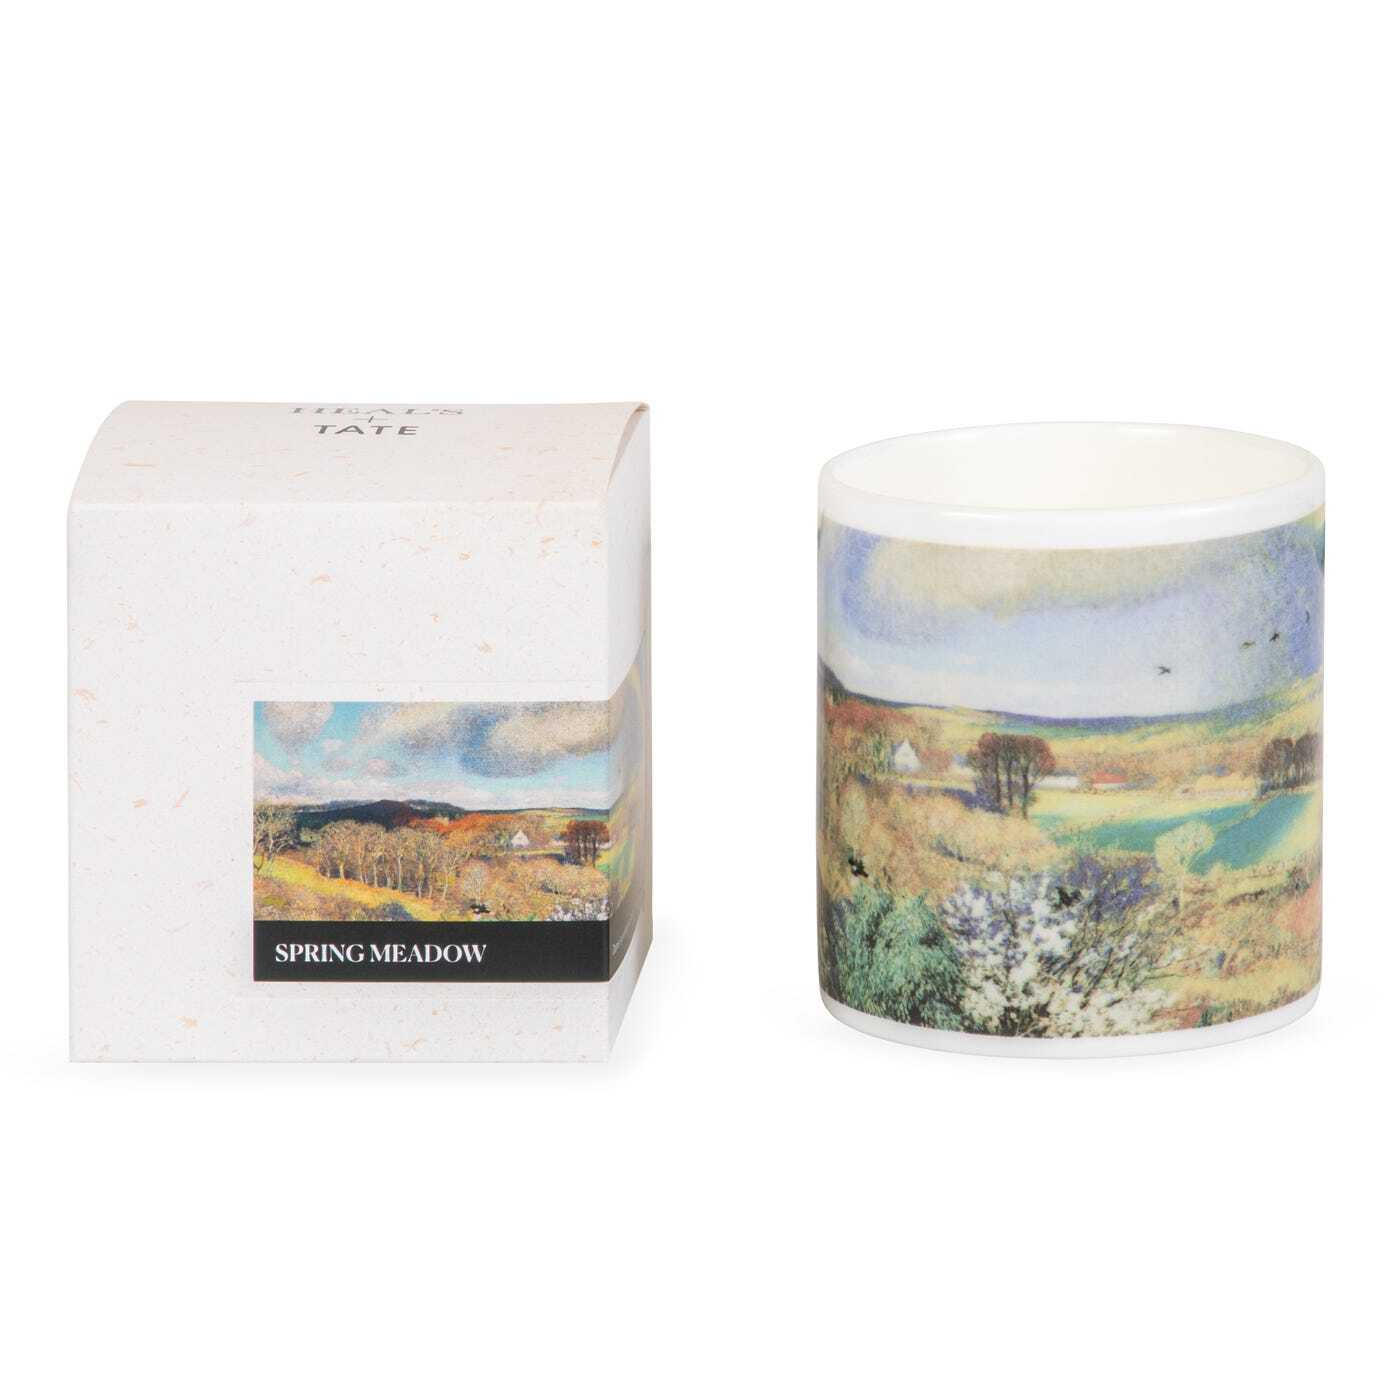 Heal's + Tate Collection Spring Meadow Scented Candle - image 1